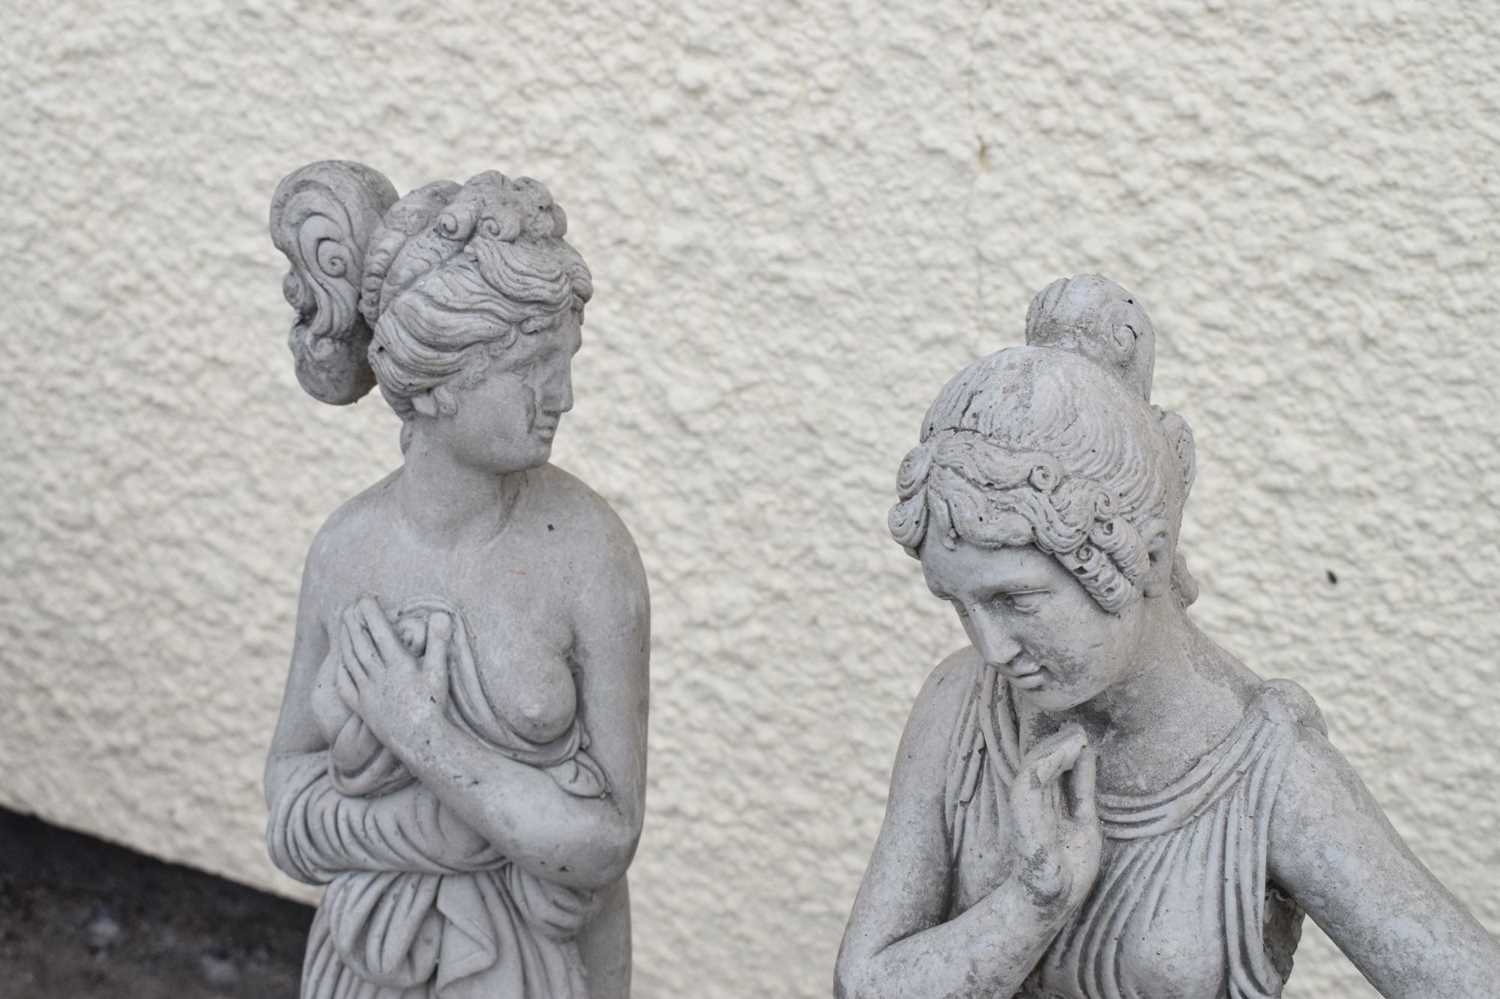 Pair of composite garden statues of classical style maidens - Image 2 of 6